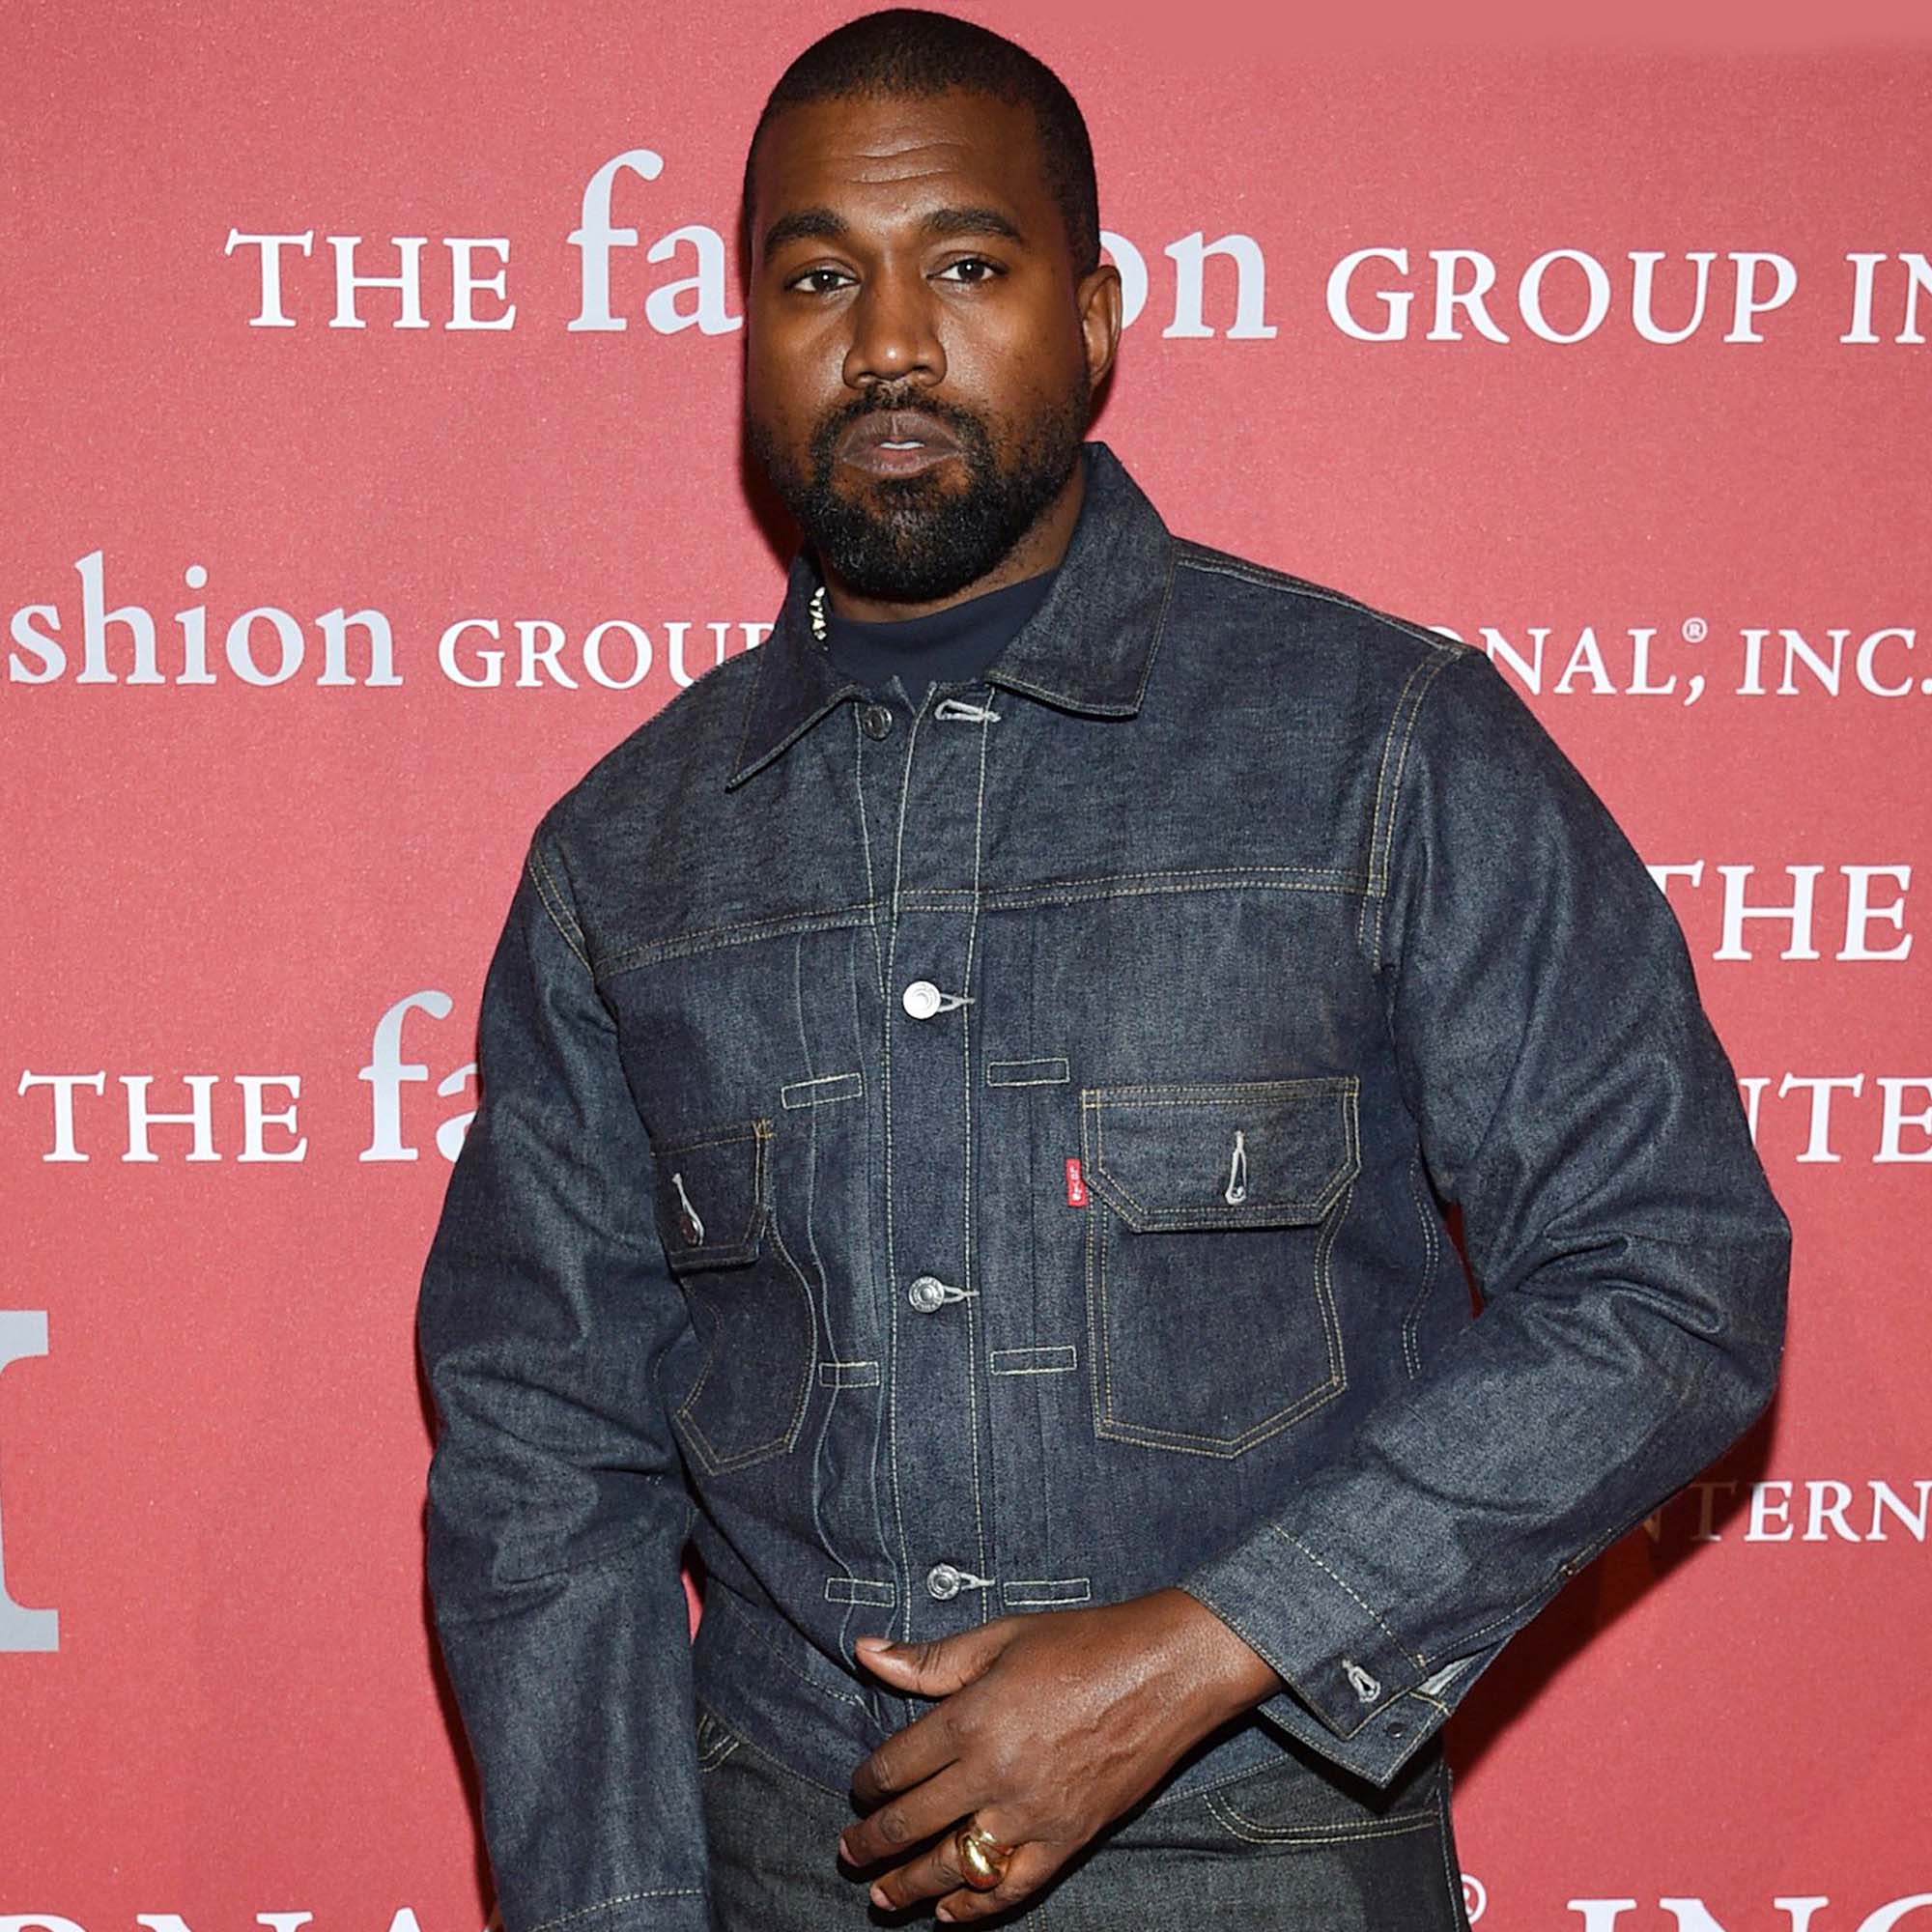 Kanye West Wears 'White Lives Matter' Shirt at His Yeezy Fashion Show